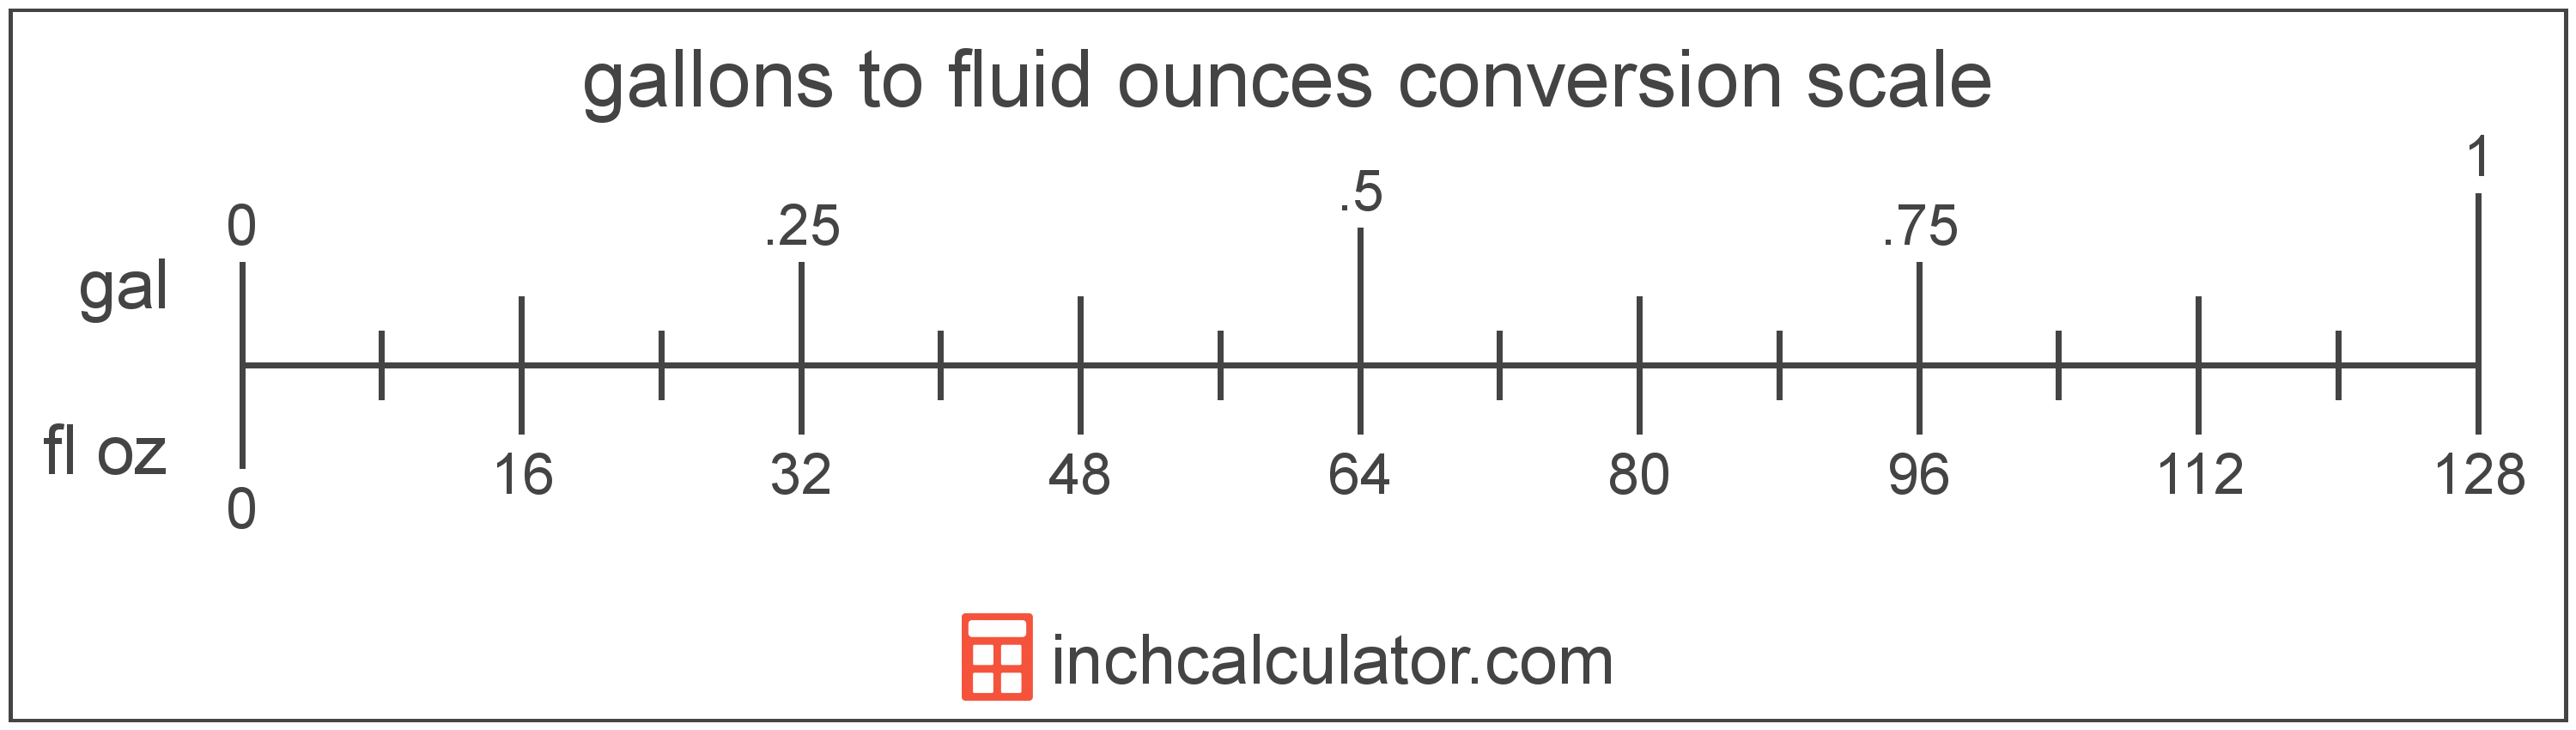 conversion scale showing gallons and equivalent fluid ounces volume values